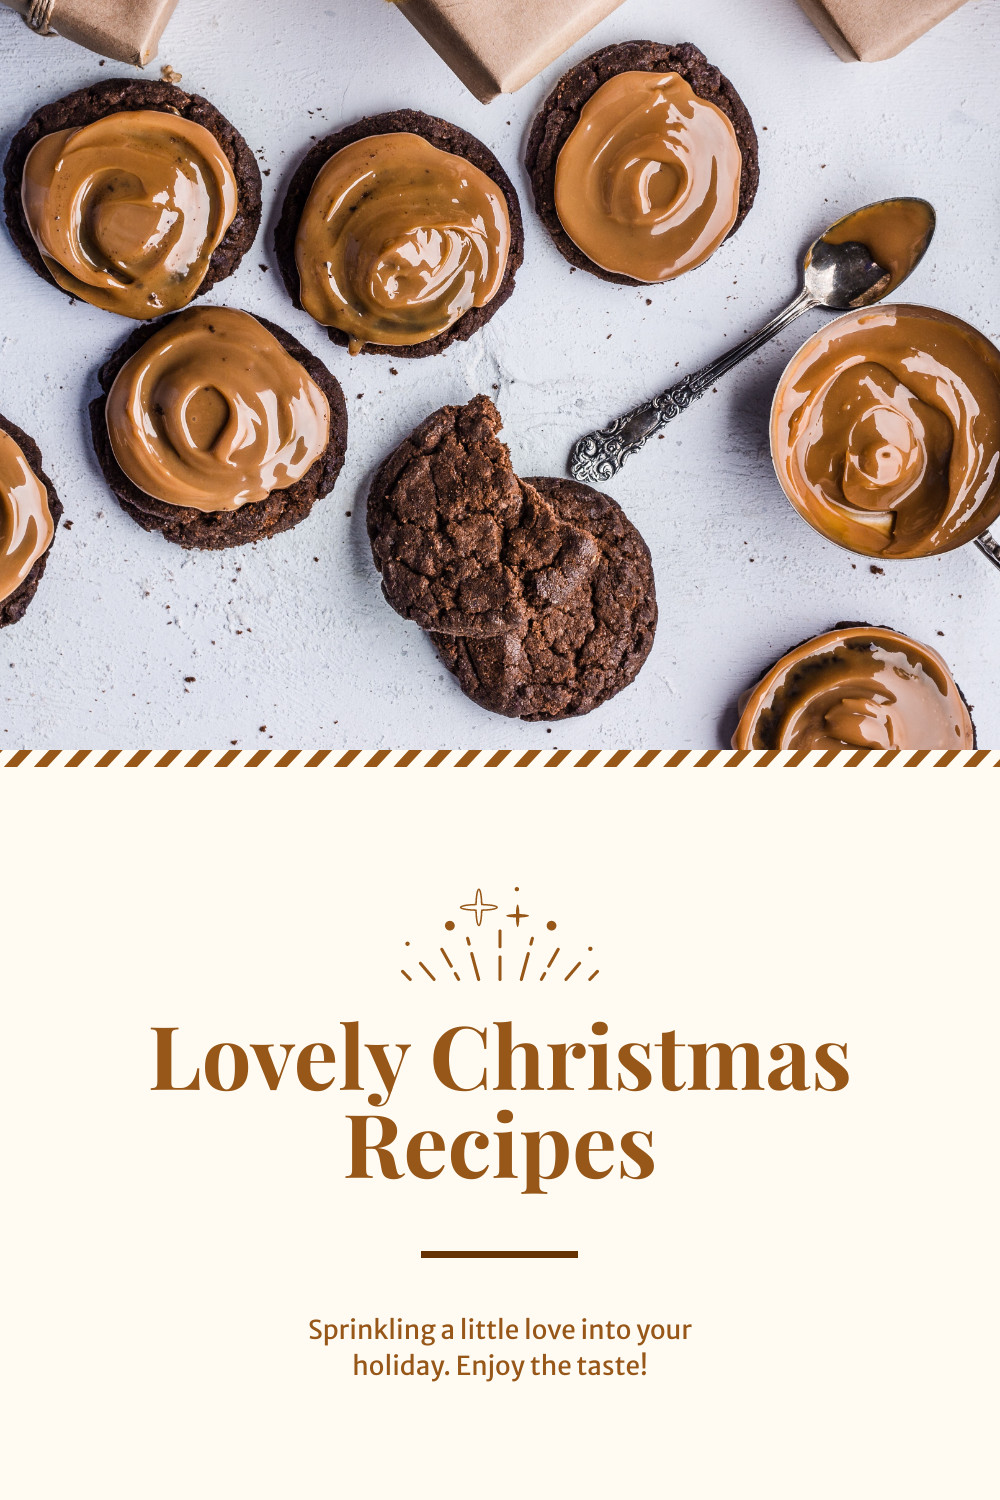 Sprinkling Lovely Christmas Recipes Facebook Cover 820x360